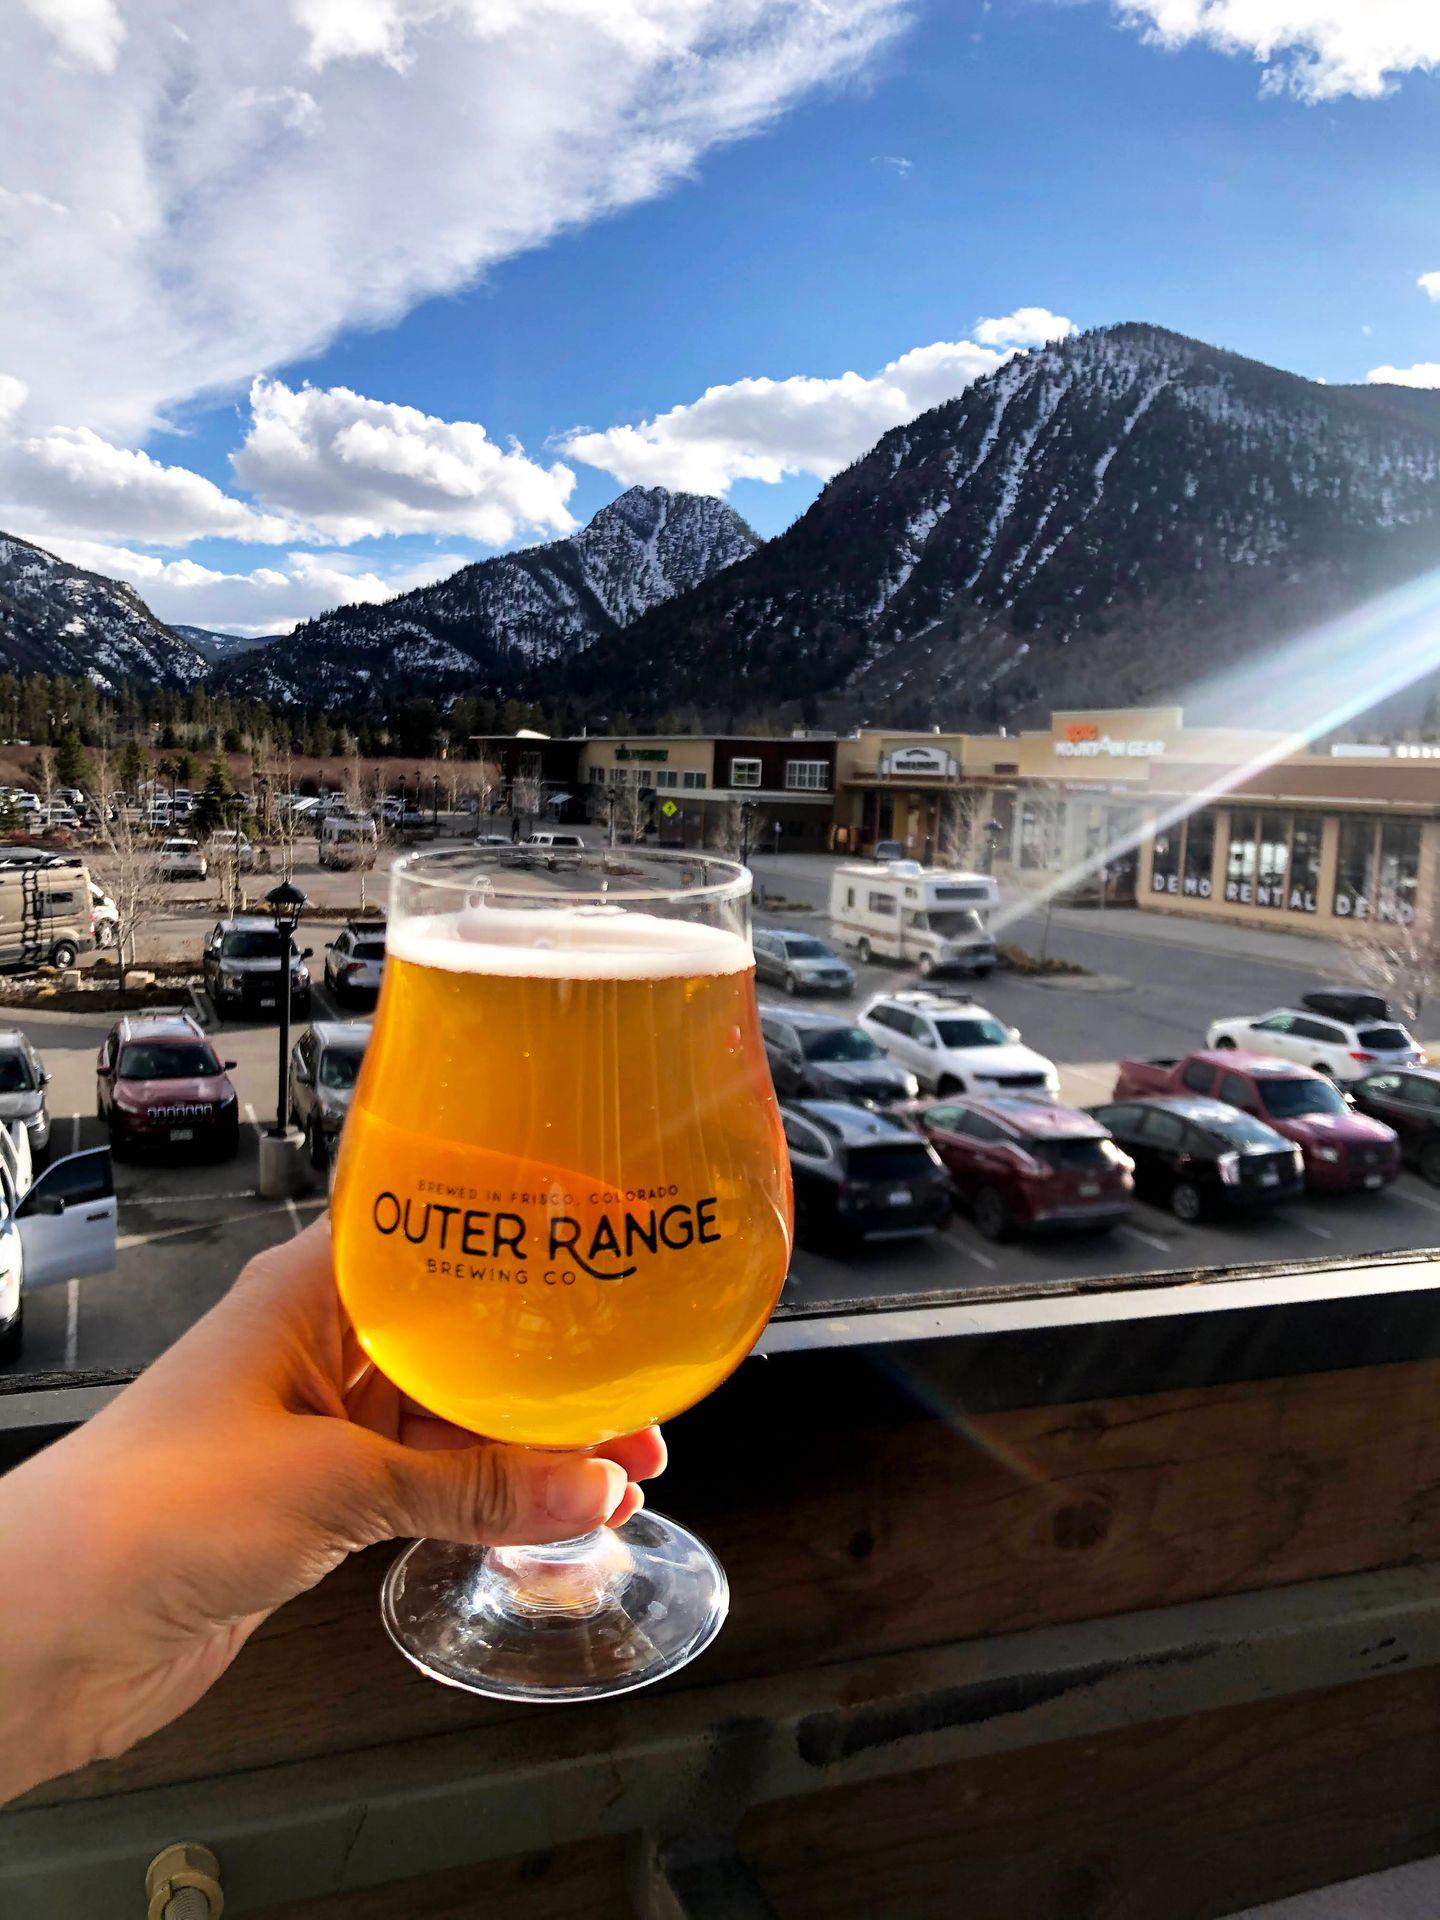 Holding up a glass of golden beer on the deck of Outer Range. There is a snow covered mountain in the distance.